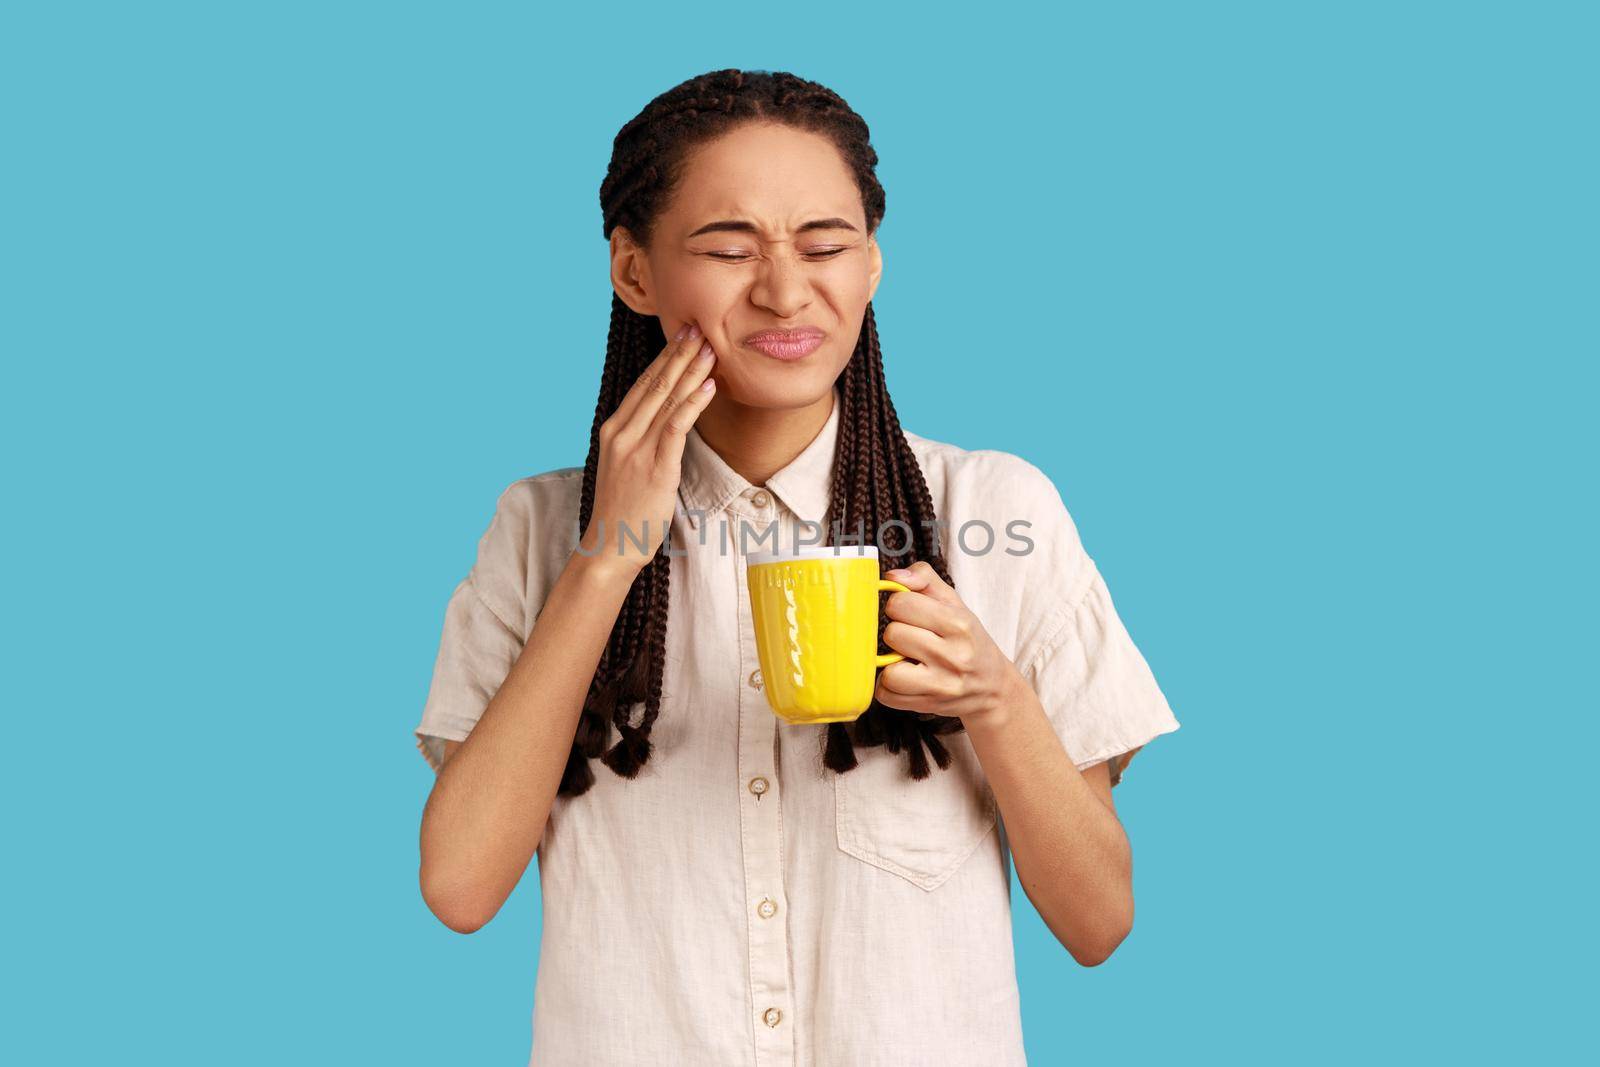 Portrait of unhealthy woman with black dreadlocks wearing white shirt. holding cup in hands, having tooth pain after drinking cold or hot beverage. Indoor studio shot isolated on blue background.